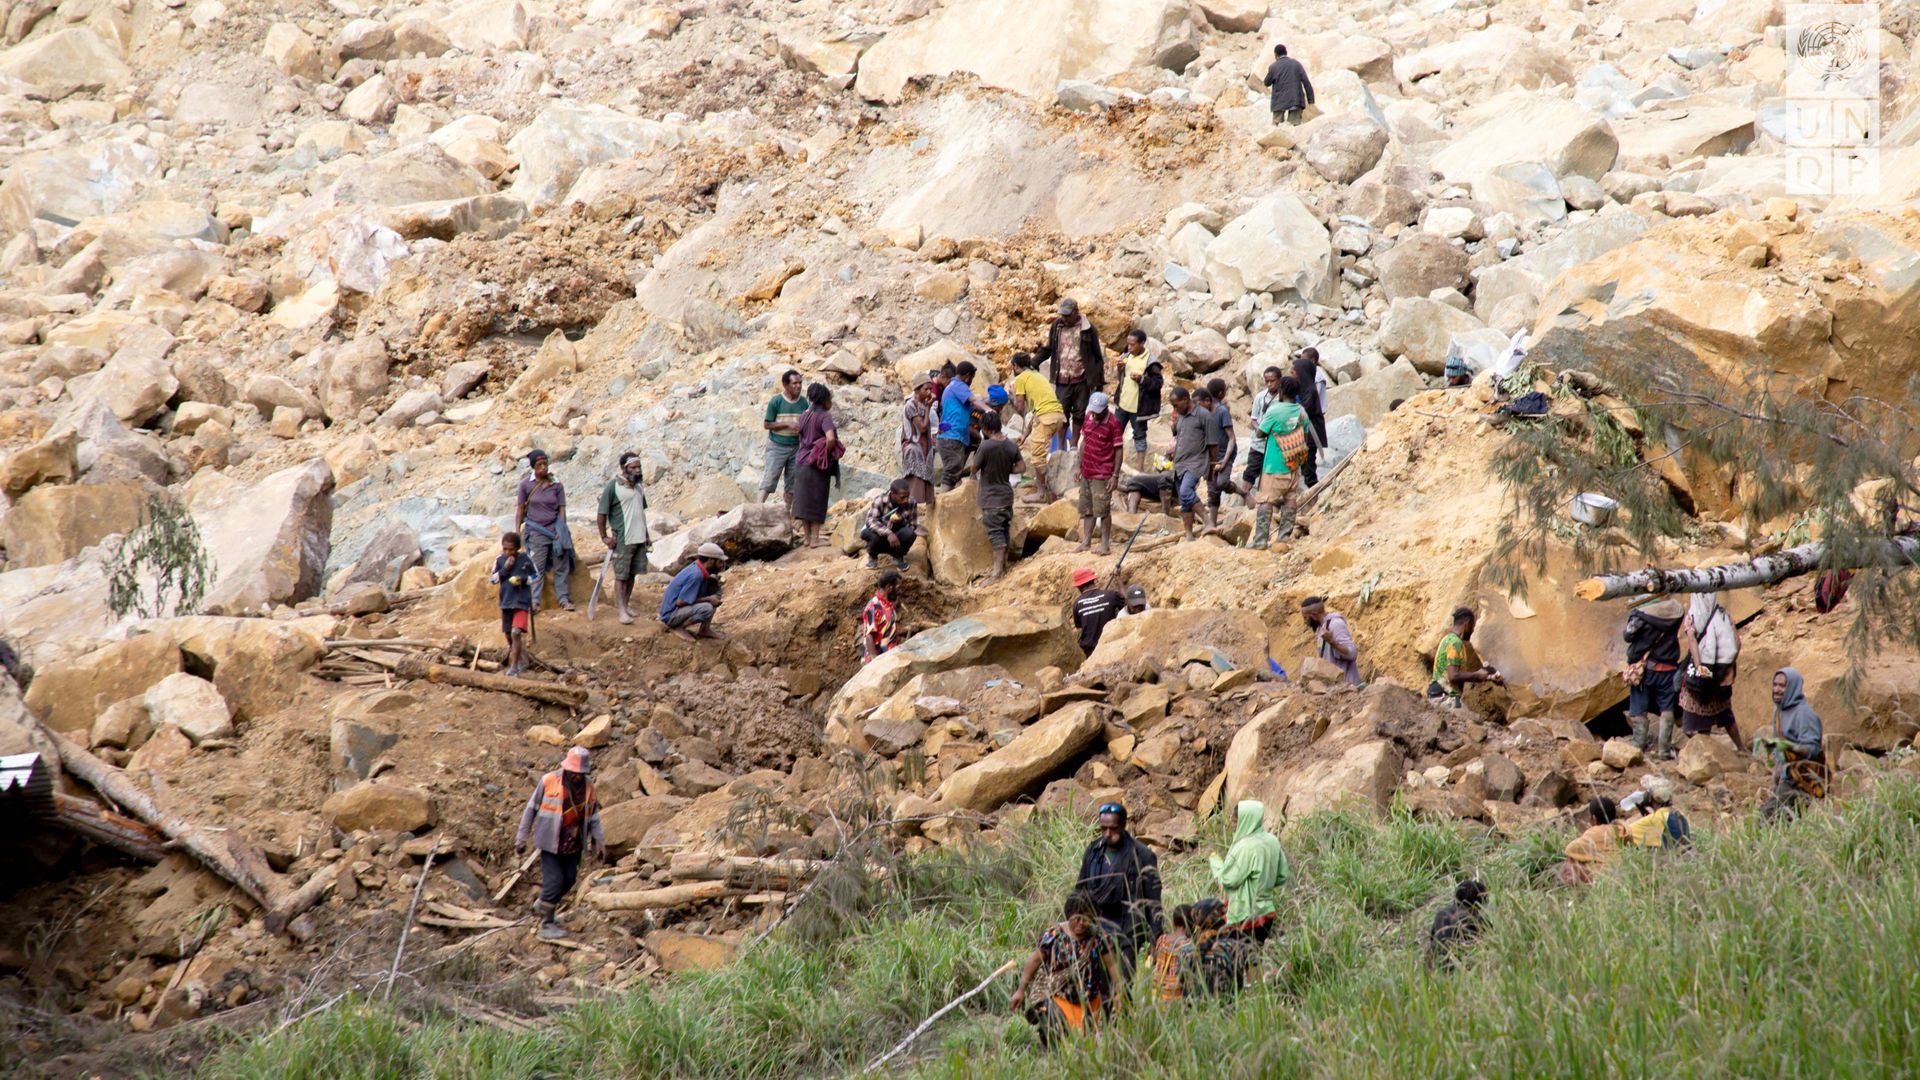 Evacuation order as fears of another landslide grow - more than 2,000 buried in initial rockfall...